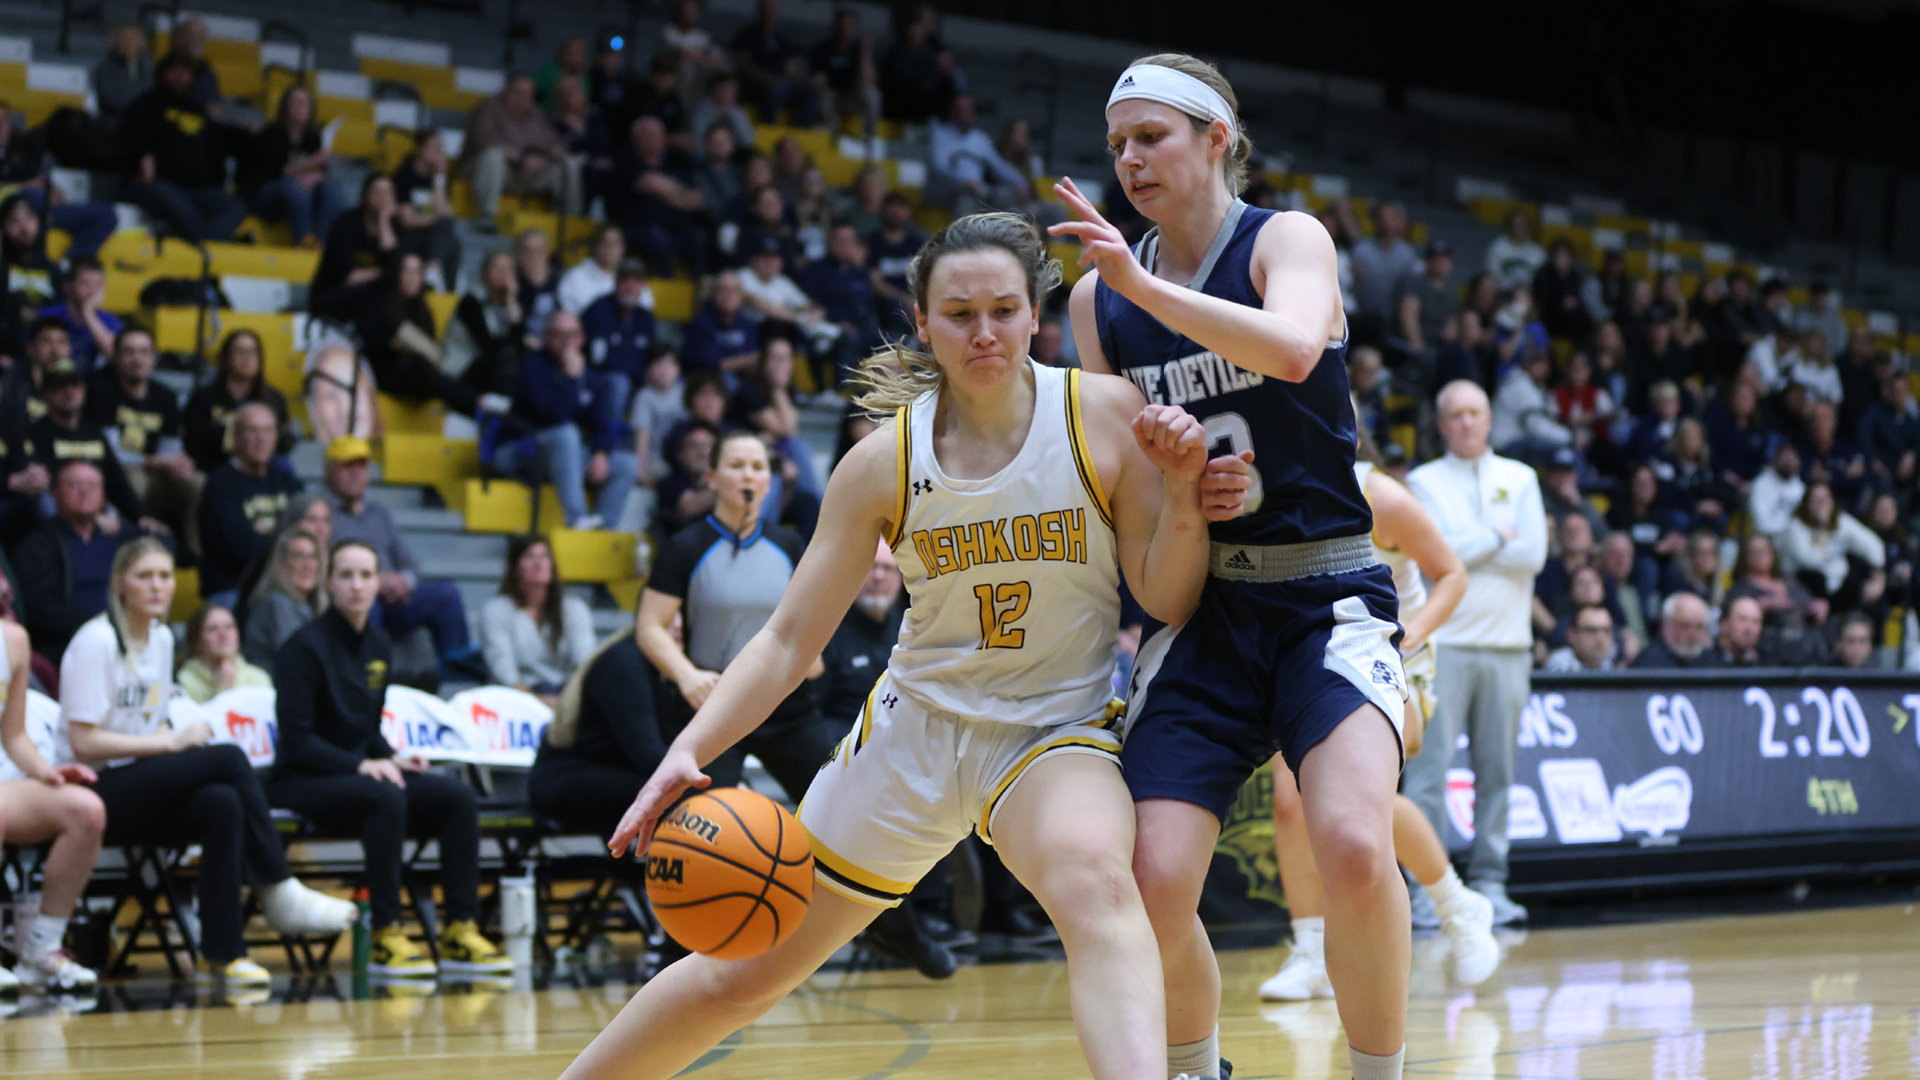 Bridget Froehlke led the Titans with 17 points in the WIAC Championship in Oshkosh on Friday. Photo Credit: Steve Frommell, UW-Oshkosh Sports Information